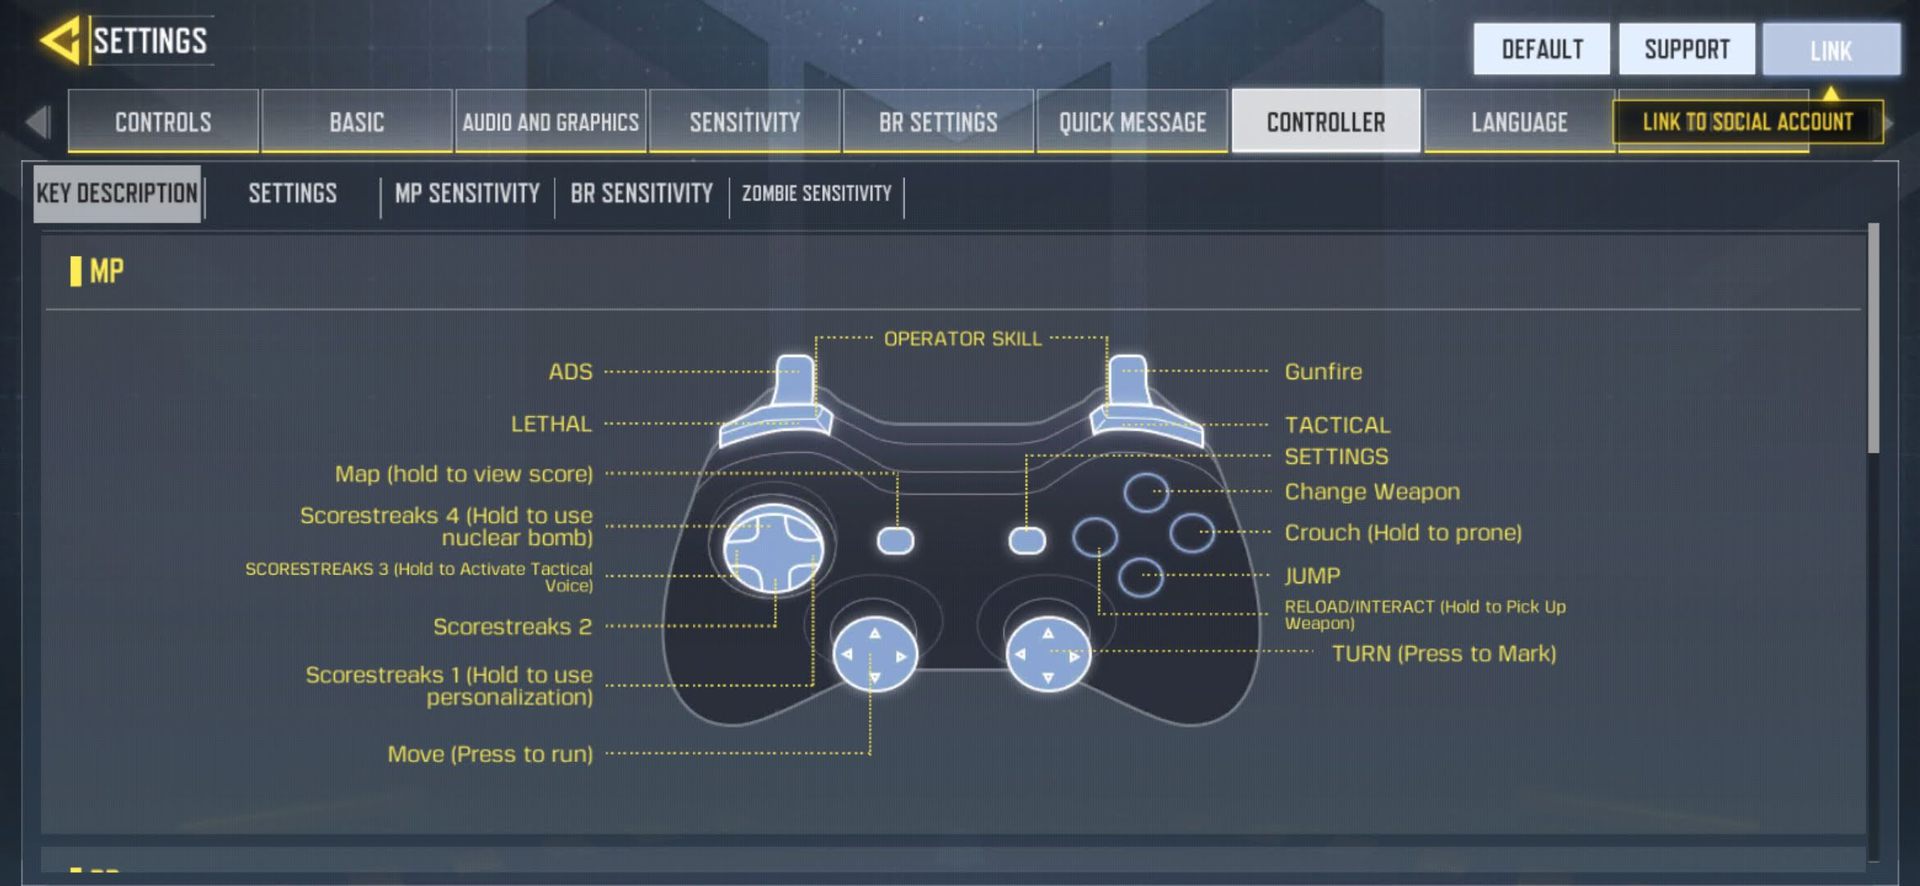 How To Play Call Of Duty Mobile With PS4 Controller - Full Guide 